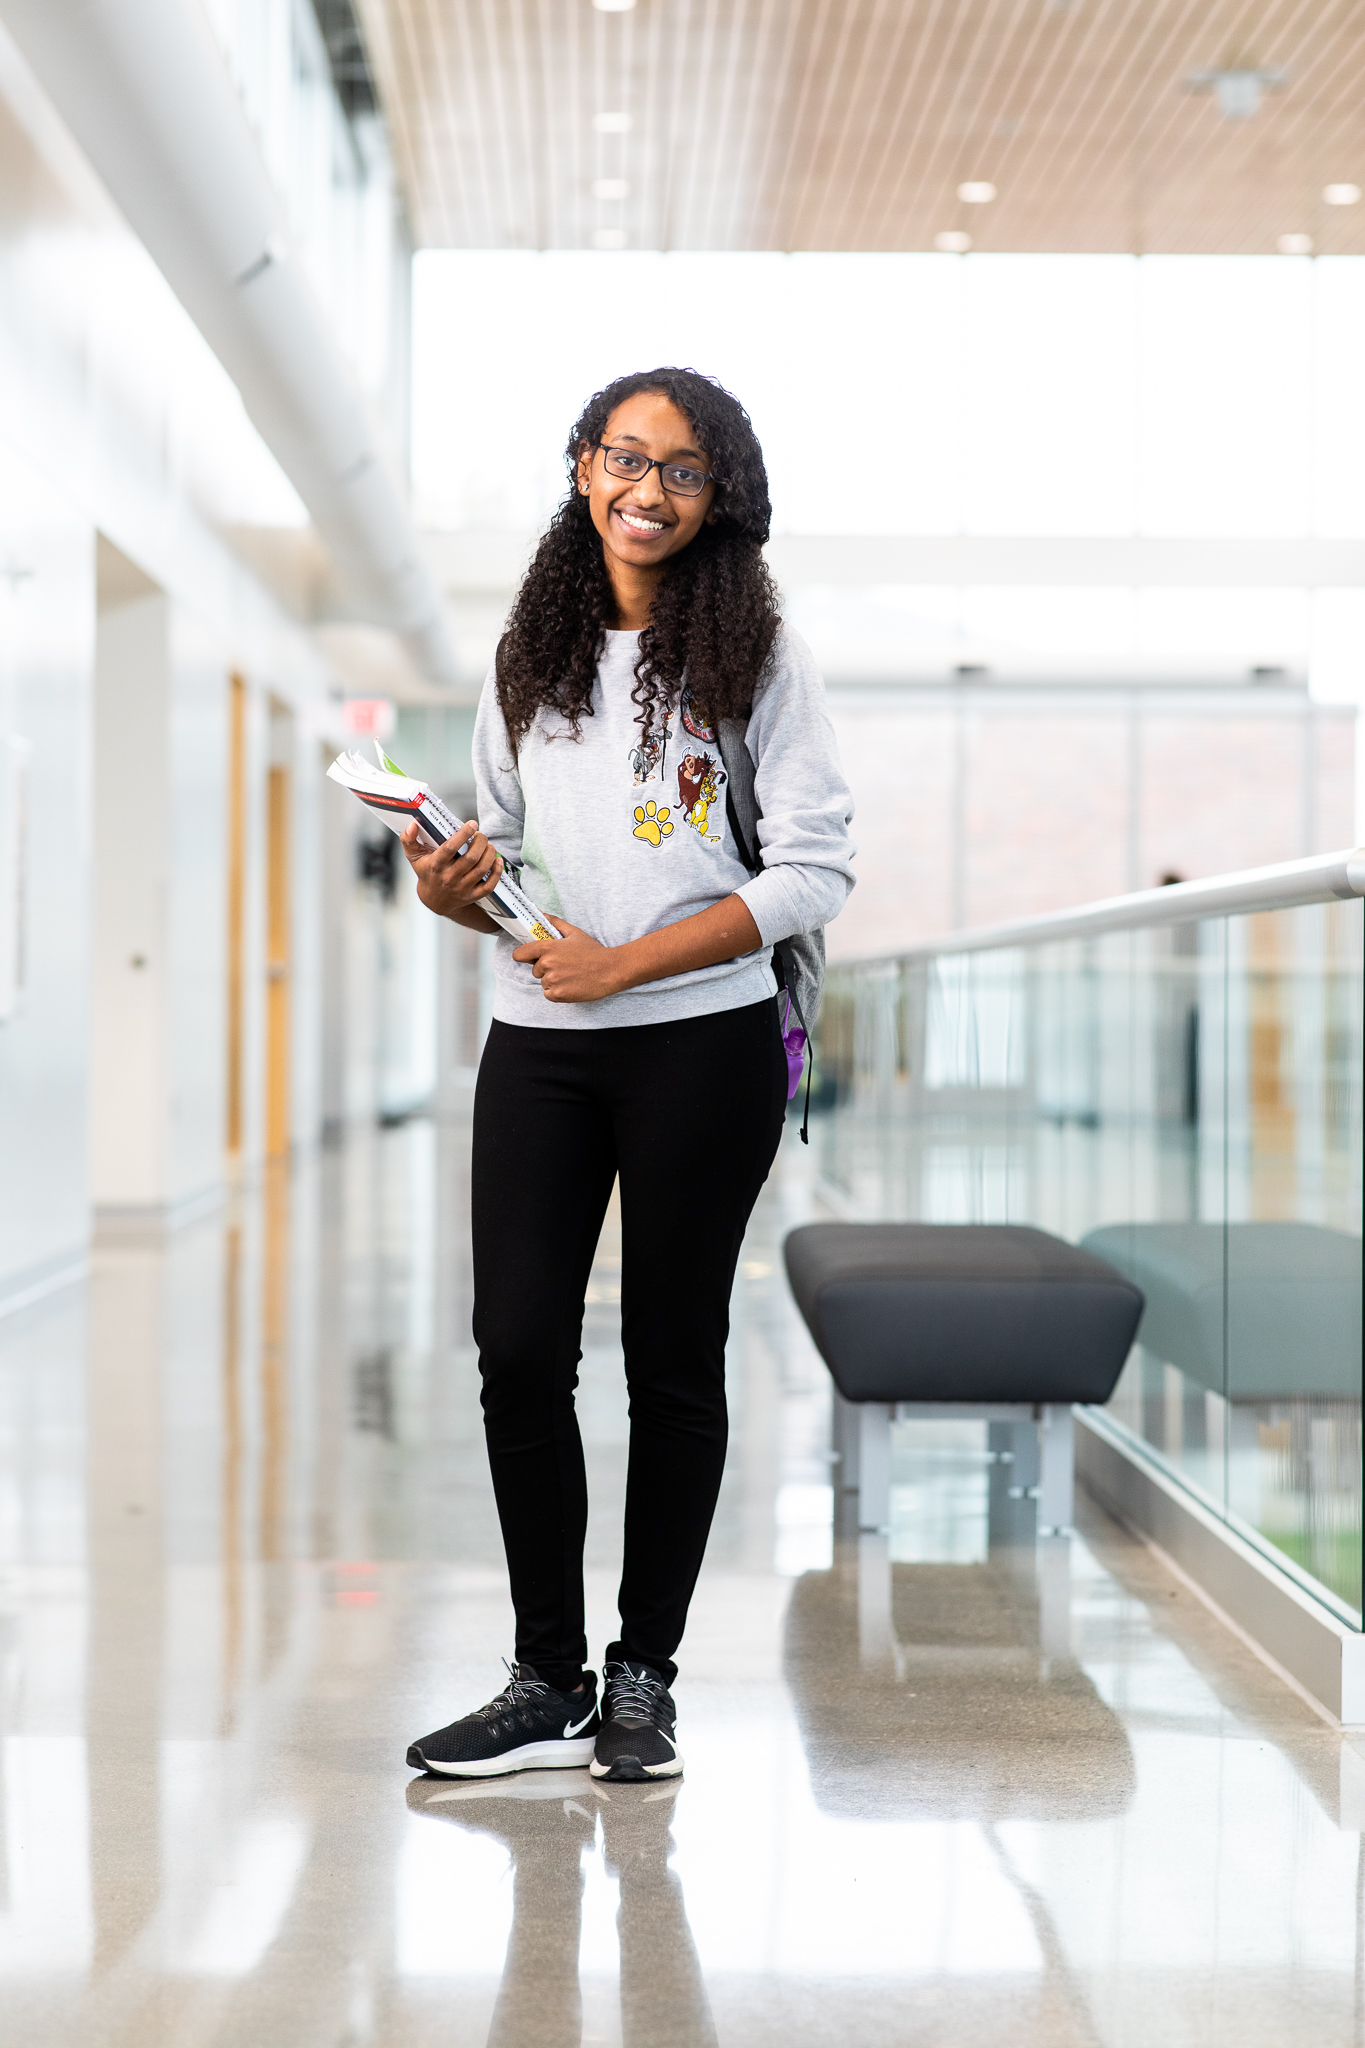 Saron Gebre wearing a gray sweater and black pants, standing while elegantly holding books in her arms.